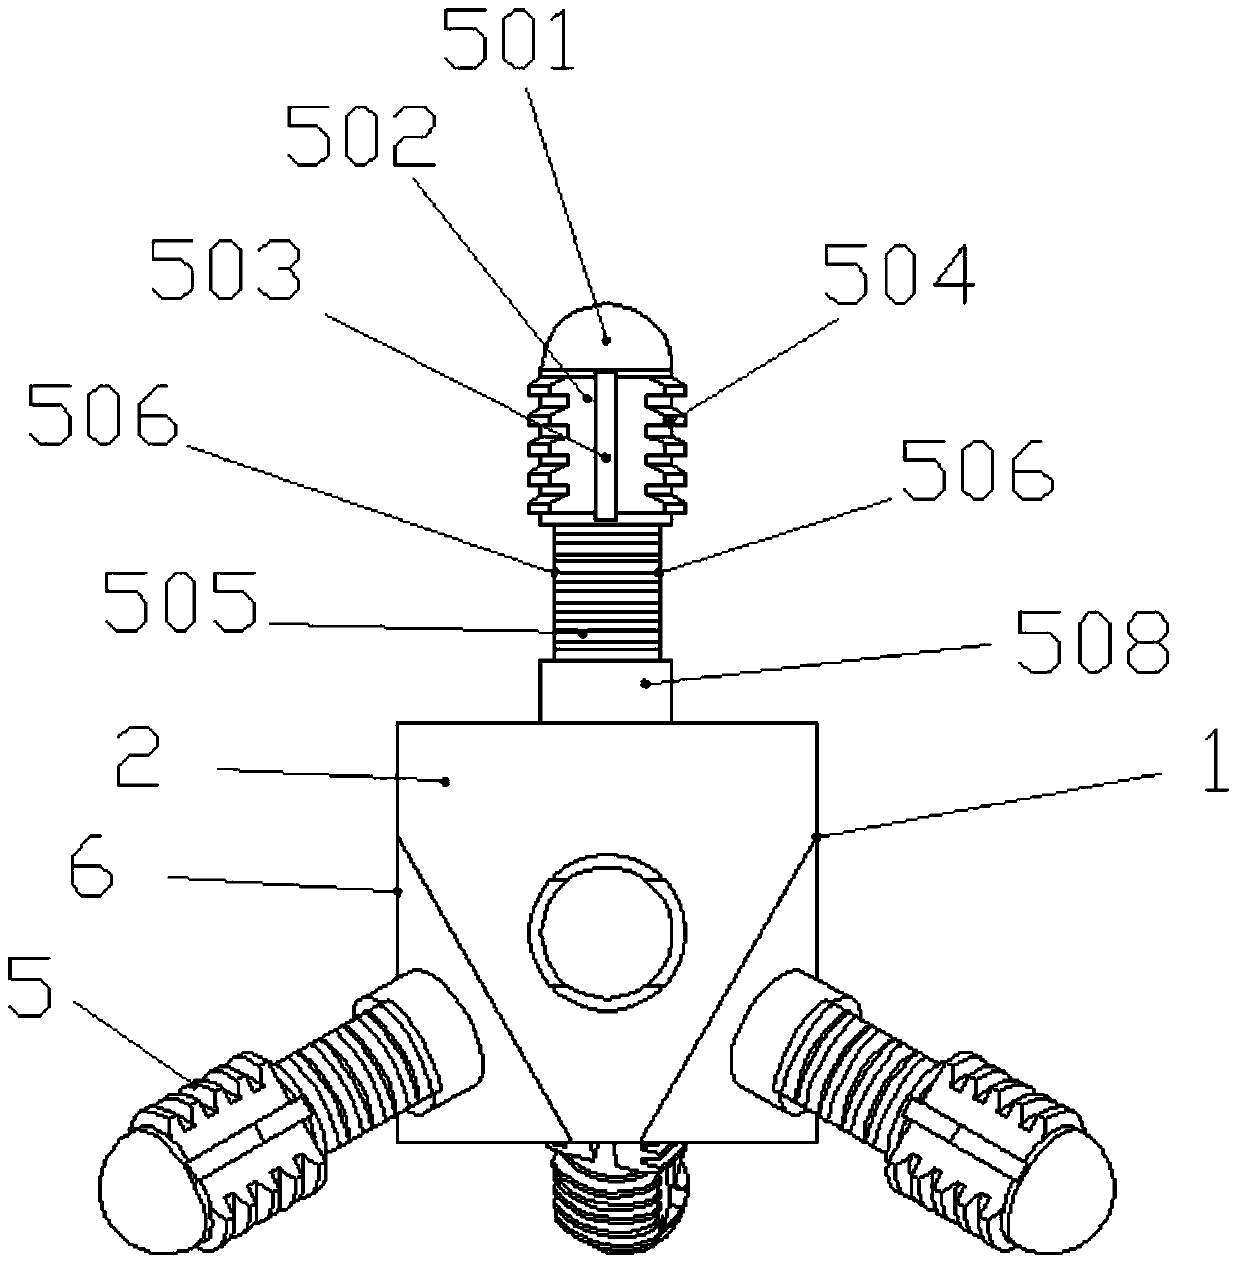 Node structural component for disassembling and assembling of corner plug matched with profiled bar